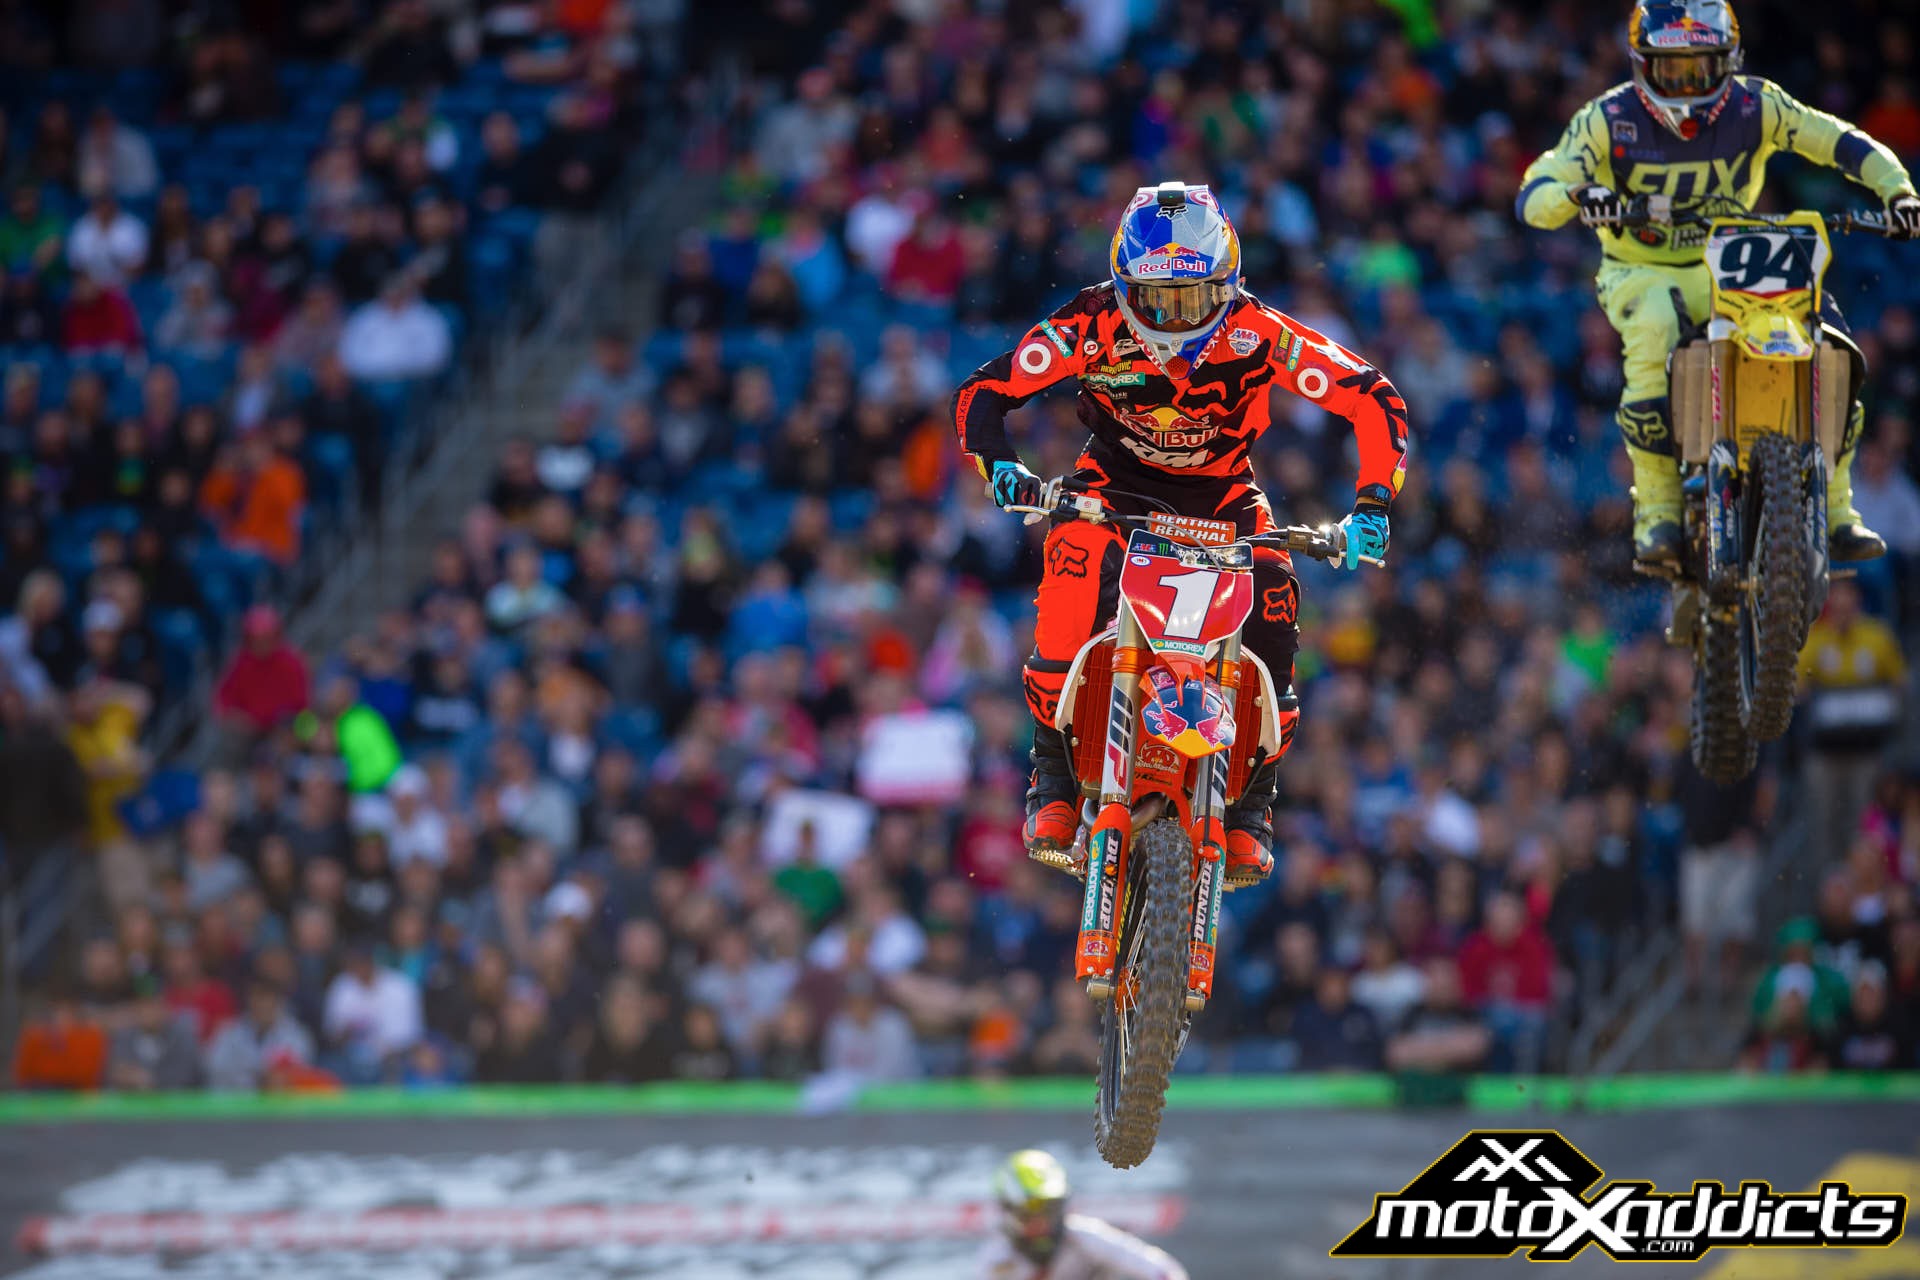 If Ken Roczen (#94) wins next weekend at MetLife Stadium,  Ryan Dungey (#1) has to finish 14th or better to clinch the 450SX Championship. 